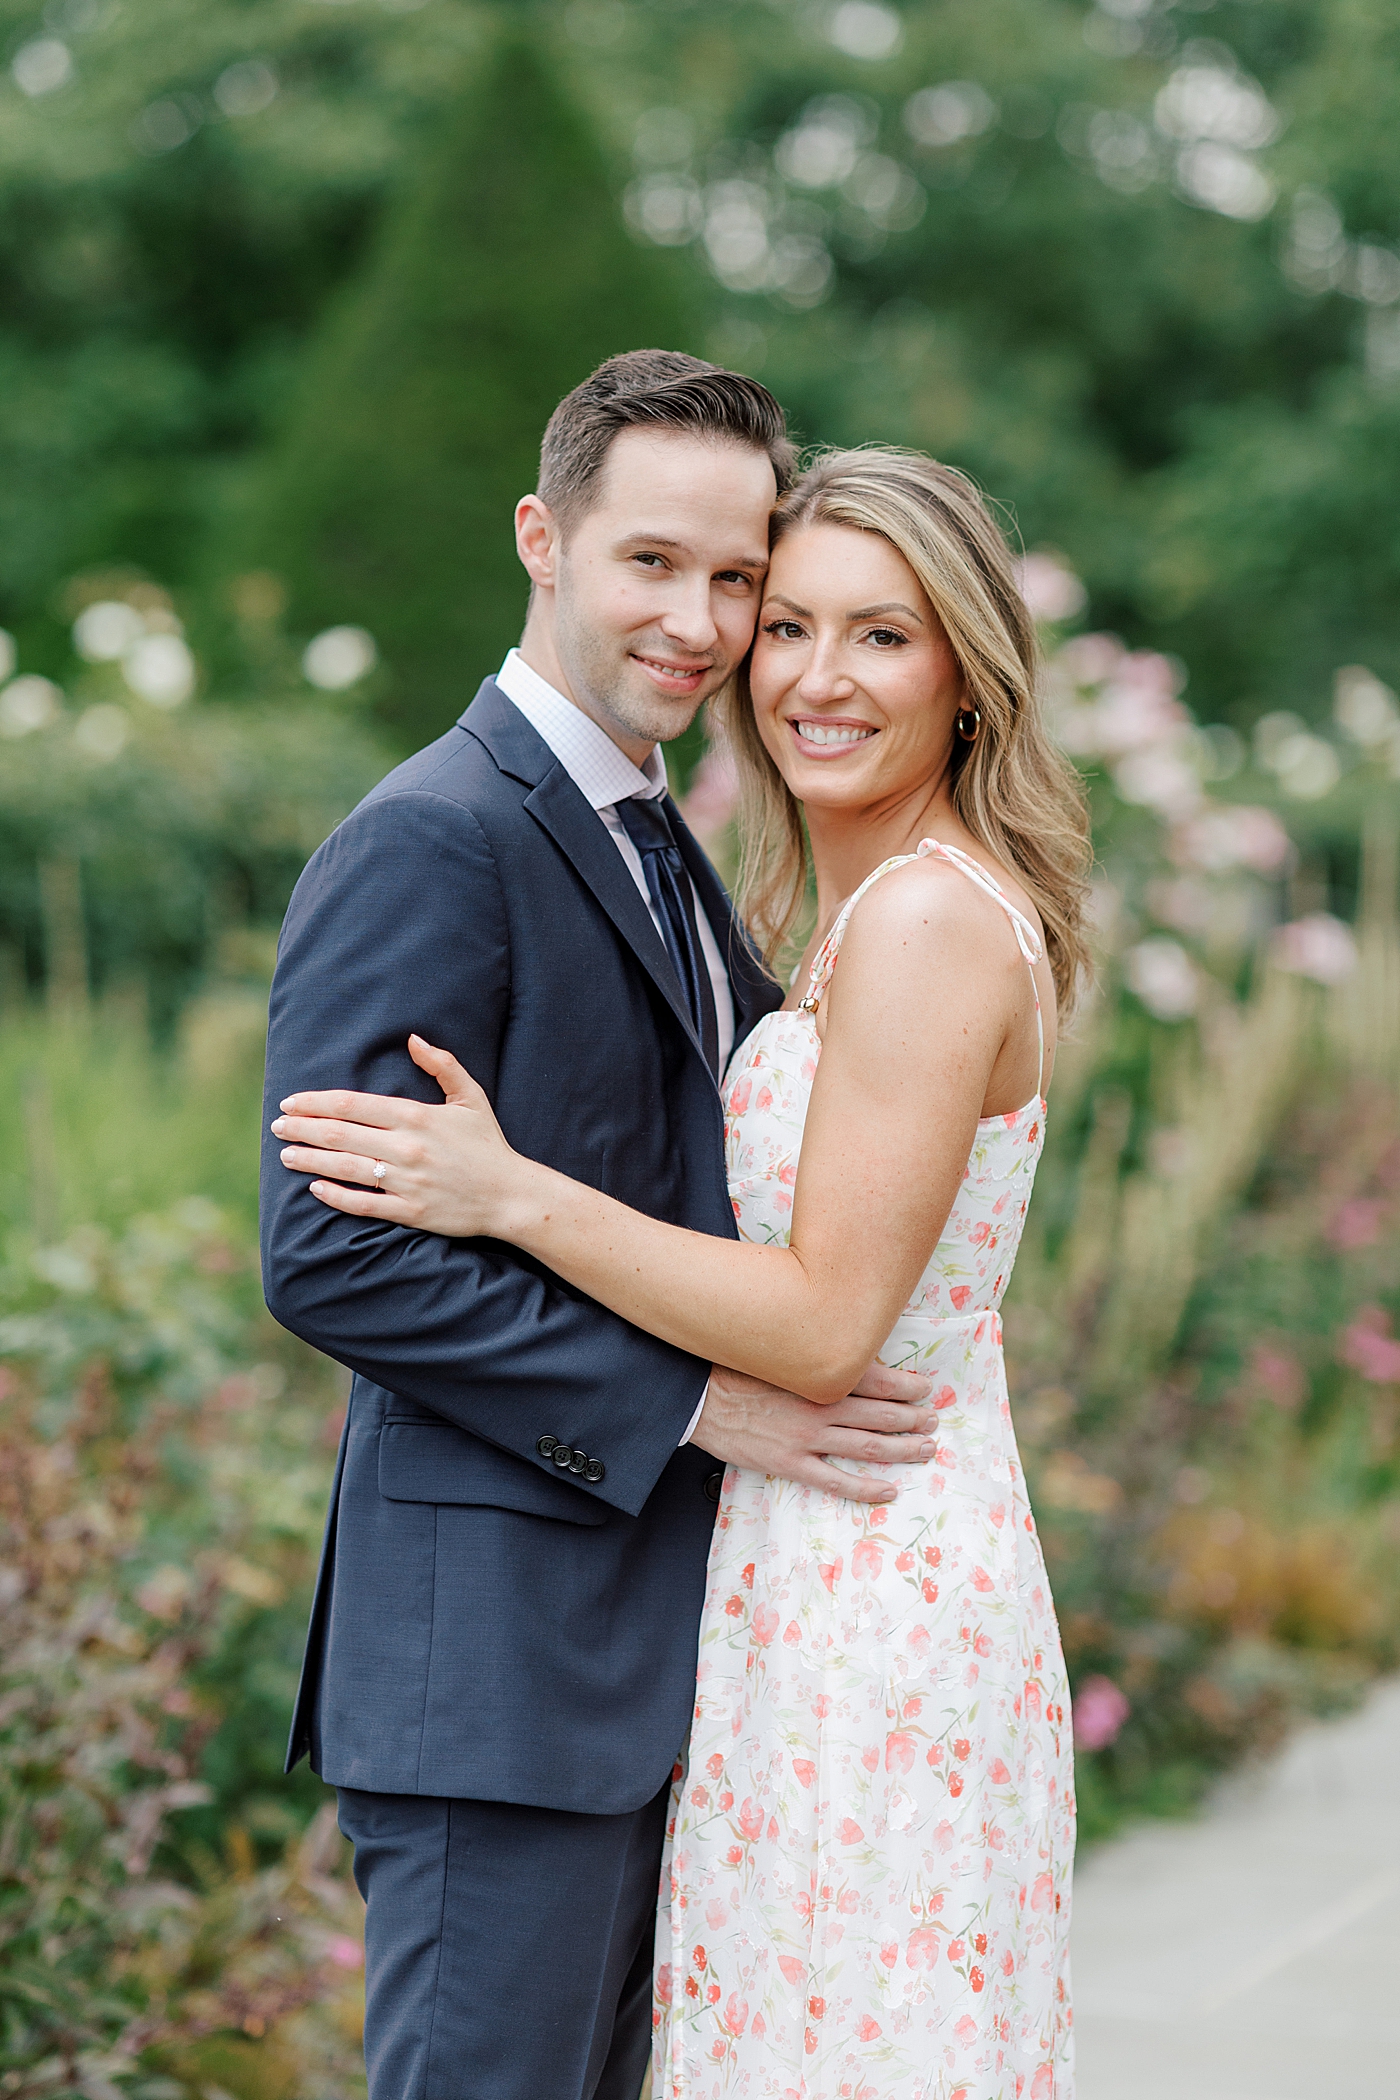 Couple smiling in a park | Engagement Session Guides by Hope Helmuth Photography